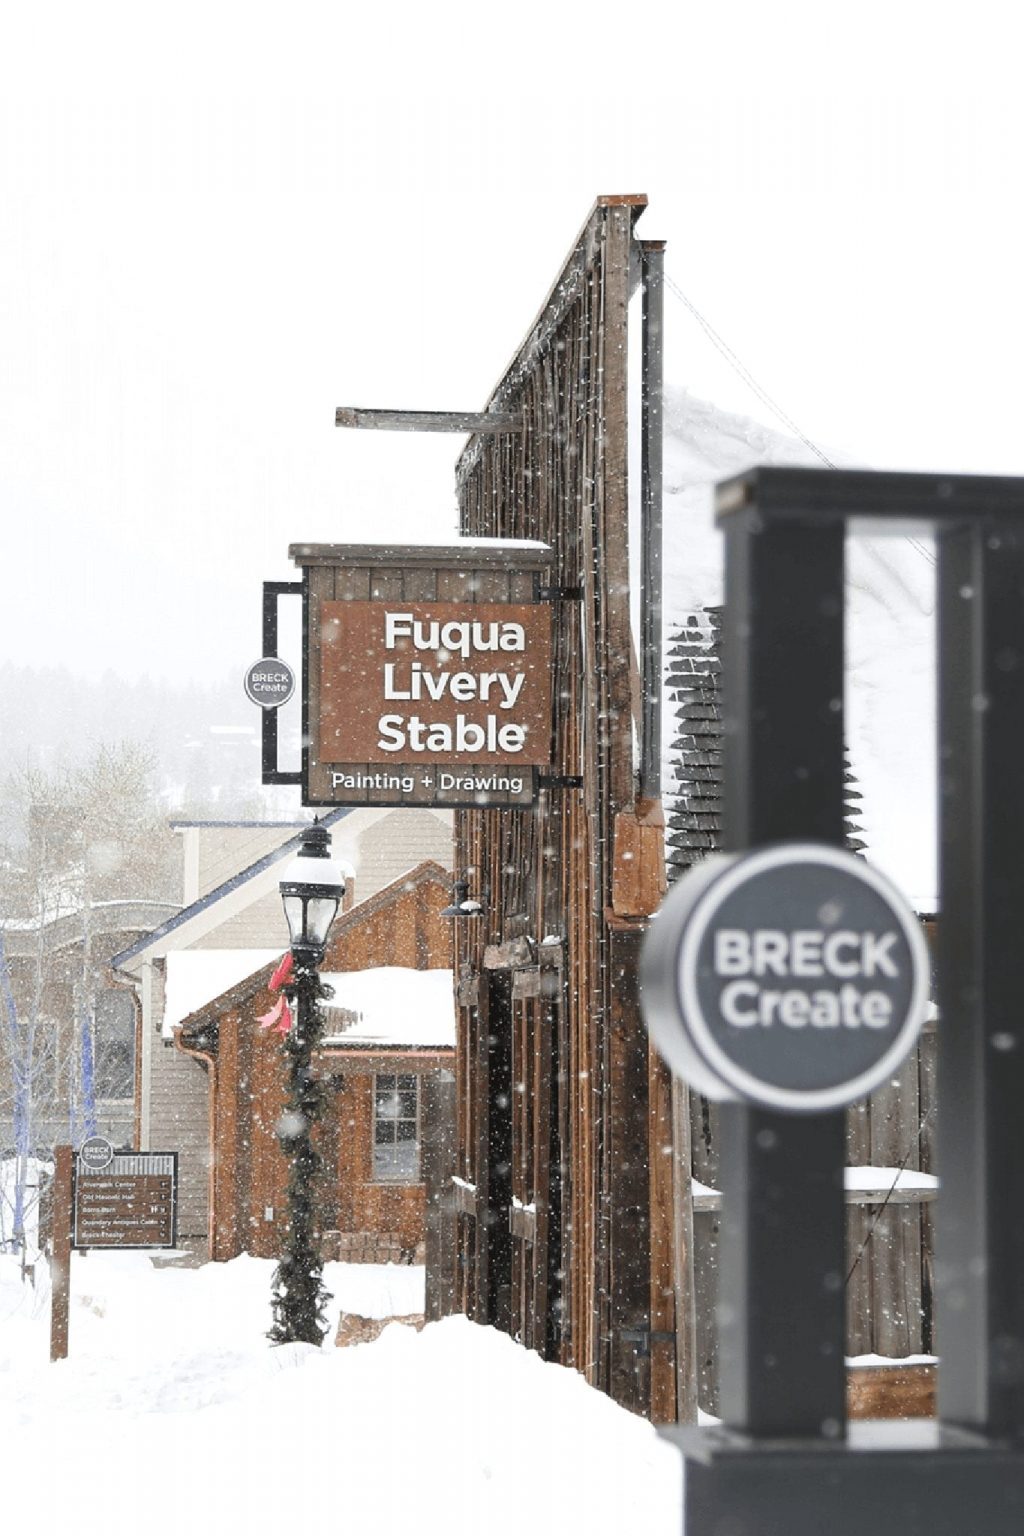 A Breckenridge downtown shop, Fuqua Livery Stable, during a winter snow.